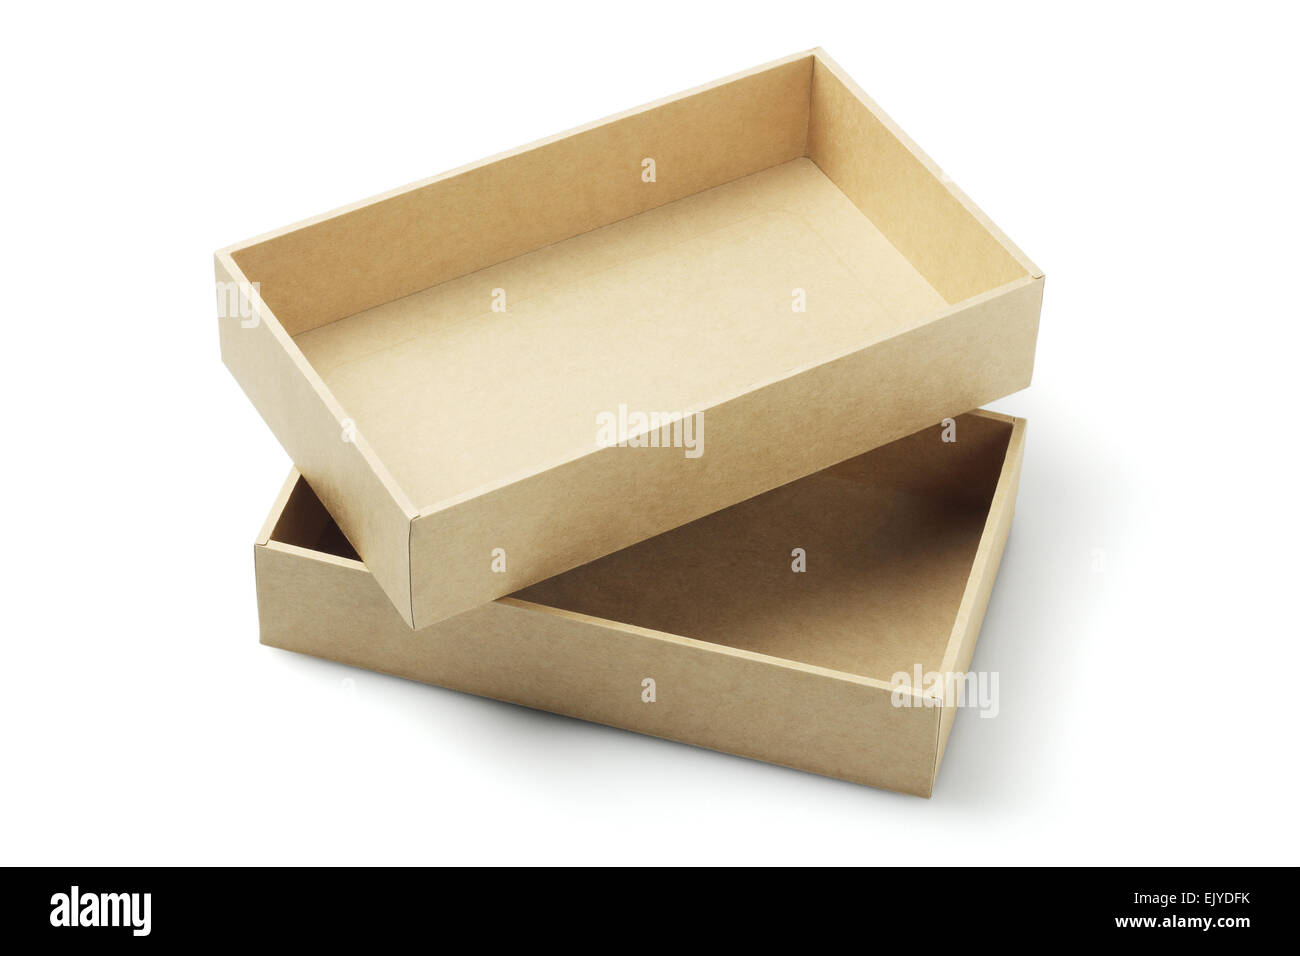 Open Cardboard Packaging Box On White Background Stock Photo